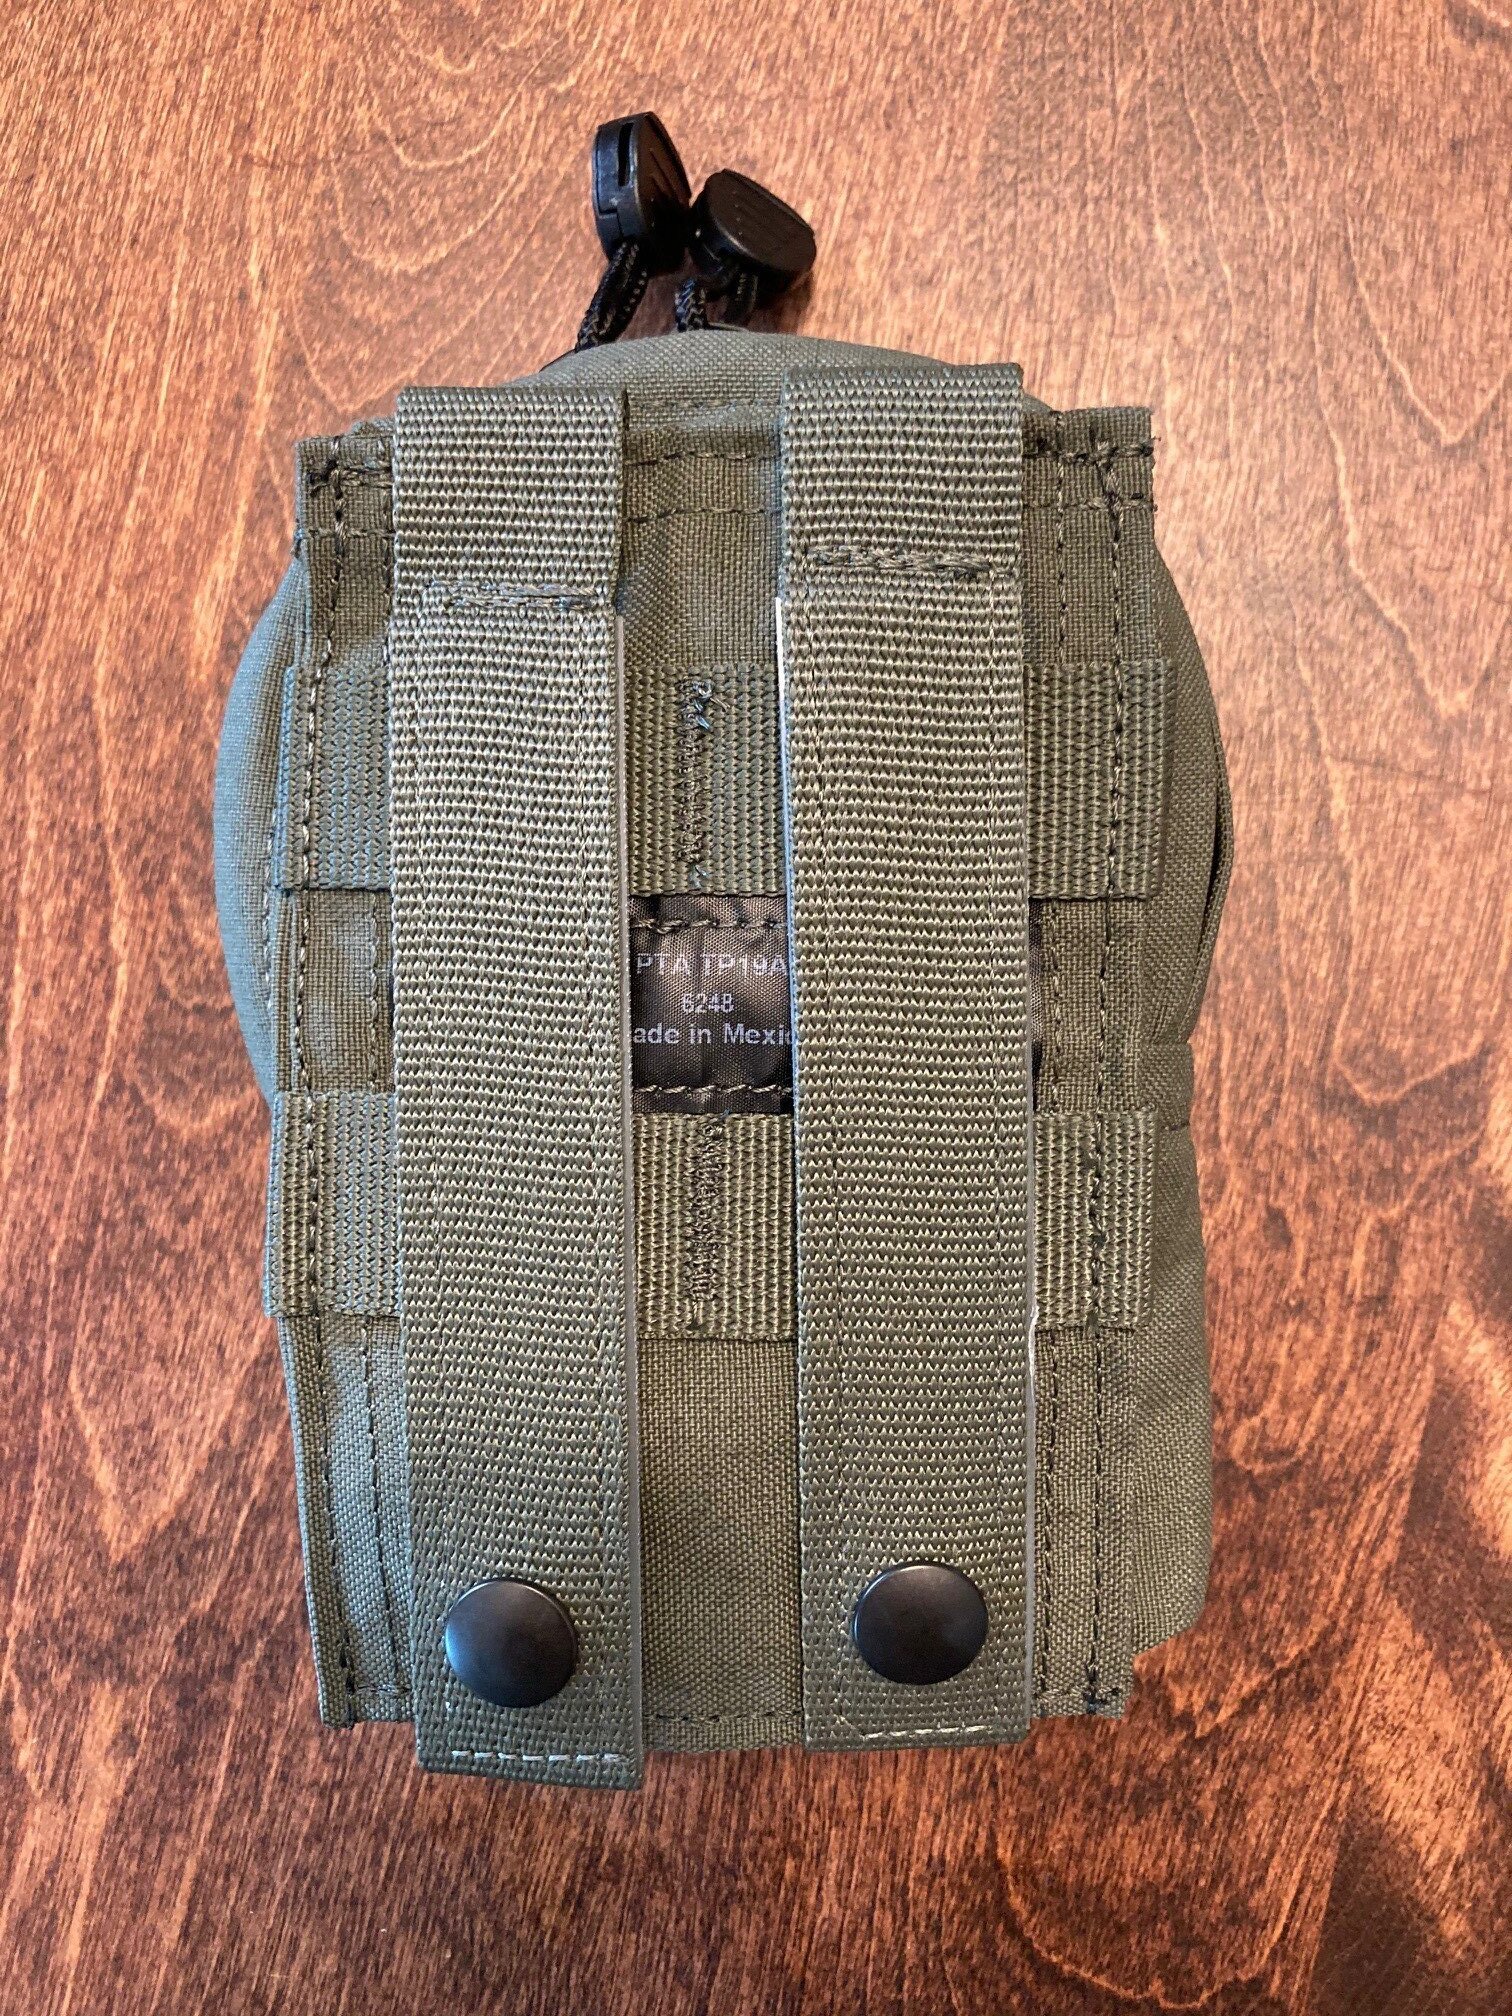 Safariland MOLLE TP19A-6248 - Tactical Green Vertical Utility Pouch, 4 ...